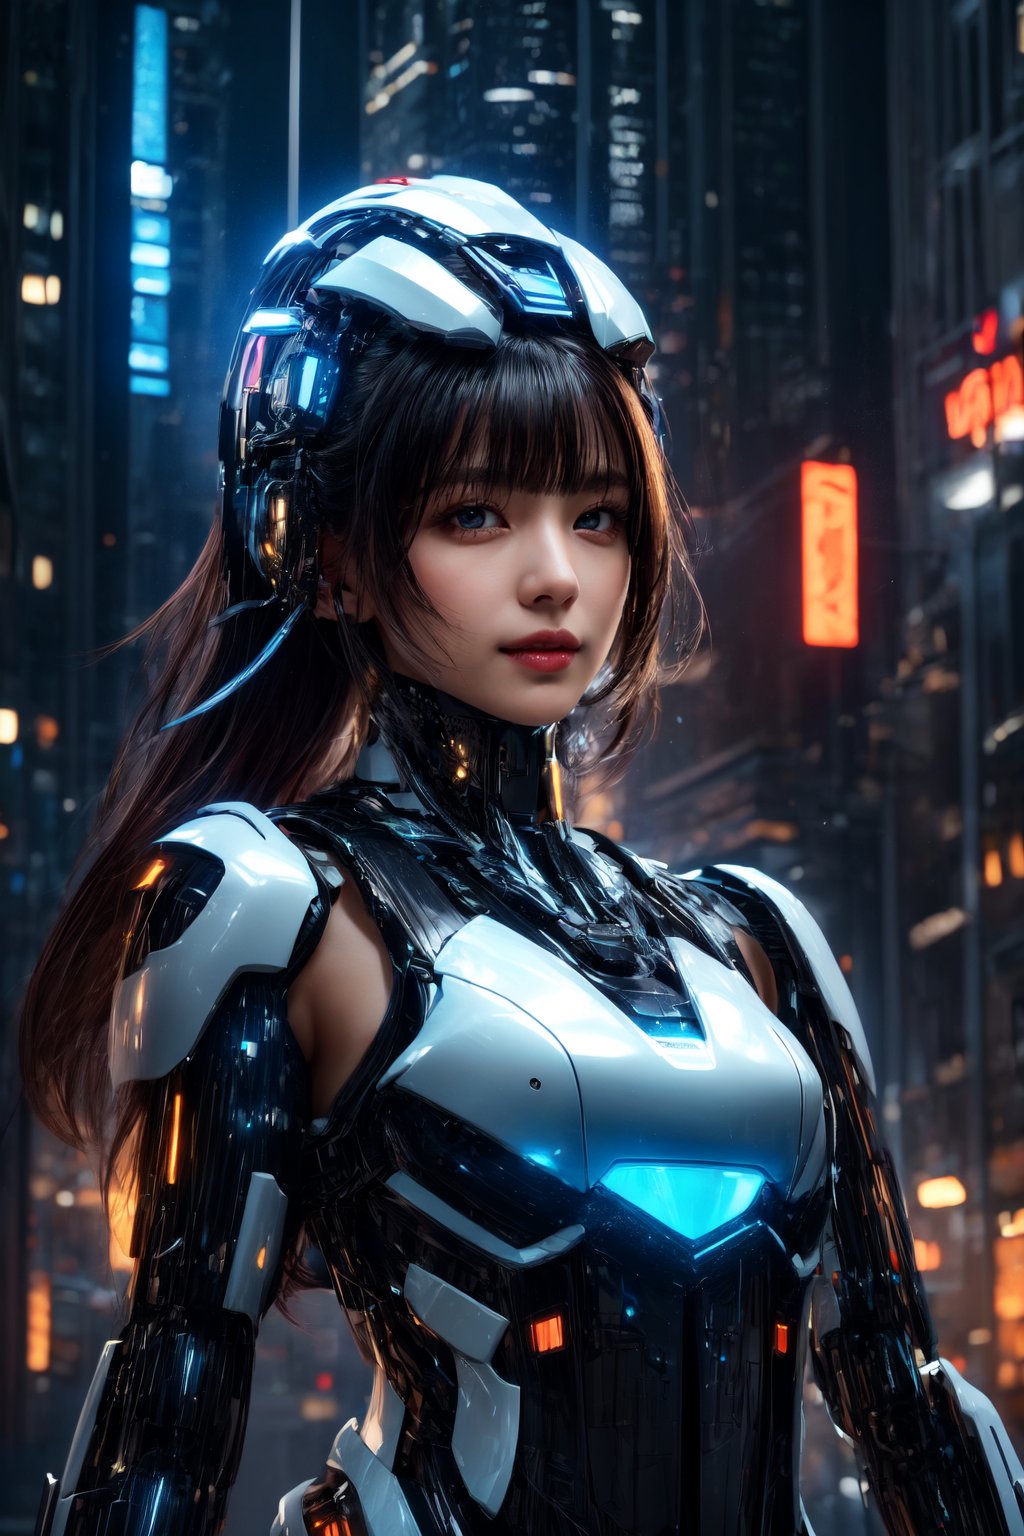 Masterpiece, High quality, 64K, Unity 64K Wallpaper, HDR, Best Quality, RAW, Super Fine Photography, Super High Resolution, Super Detailed, 
Beautiful and Aesthetic, Stunningly beautiful, Perfect proportions, 
1girl, Solo, White skin, Detailed skin, Realistic skin details, 
Futuristic Mecha, Arms Mecha, Dynamic pose, Battle stance, Swaying hair, by FuturEvoLab, 
Dark City Night, Cyberpunk city, Cyberpunk architecture, Future architecture, Fine architecture, Accurate architectural structure, Detailed complex busy background, Gorgeous, 
Sharp focus, Perfect facial features, Pure and pretty, Perfect eyes, Lively eyes, Elegant face, Delicate face, Exquisite face, Matrix,